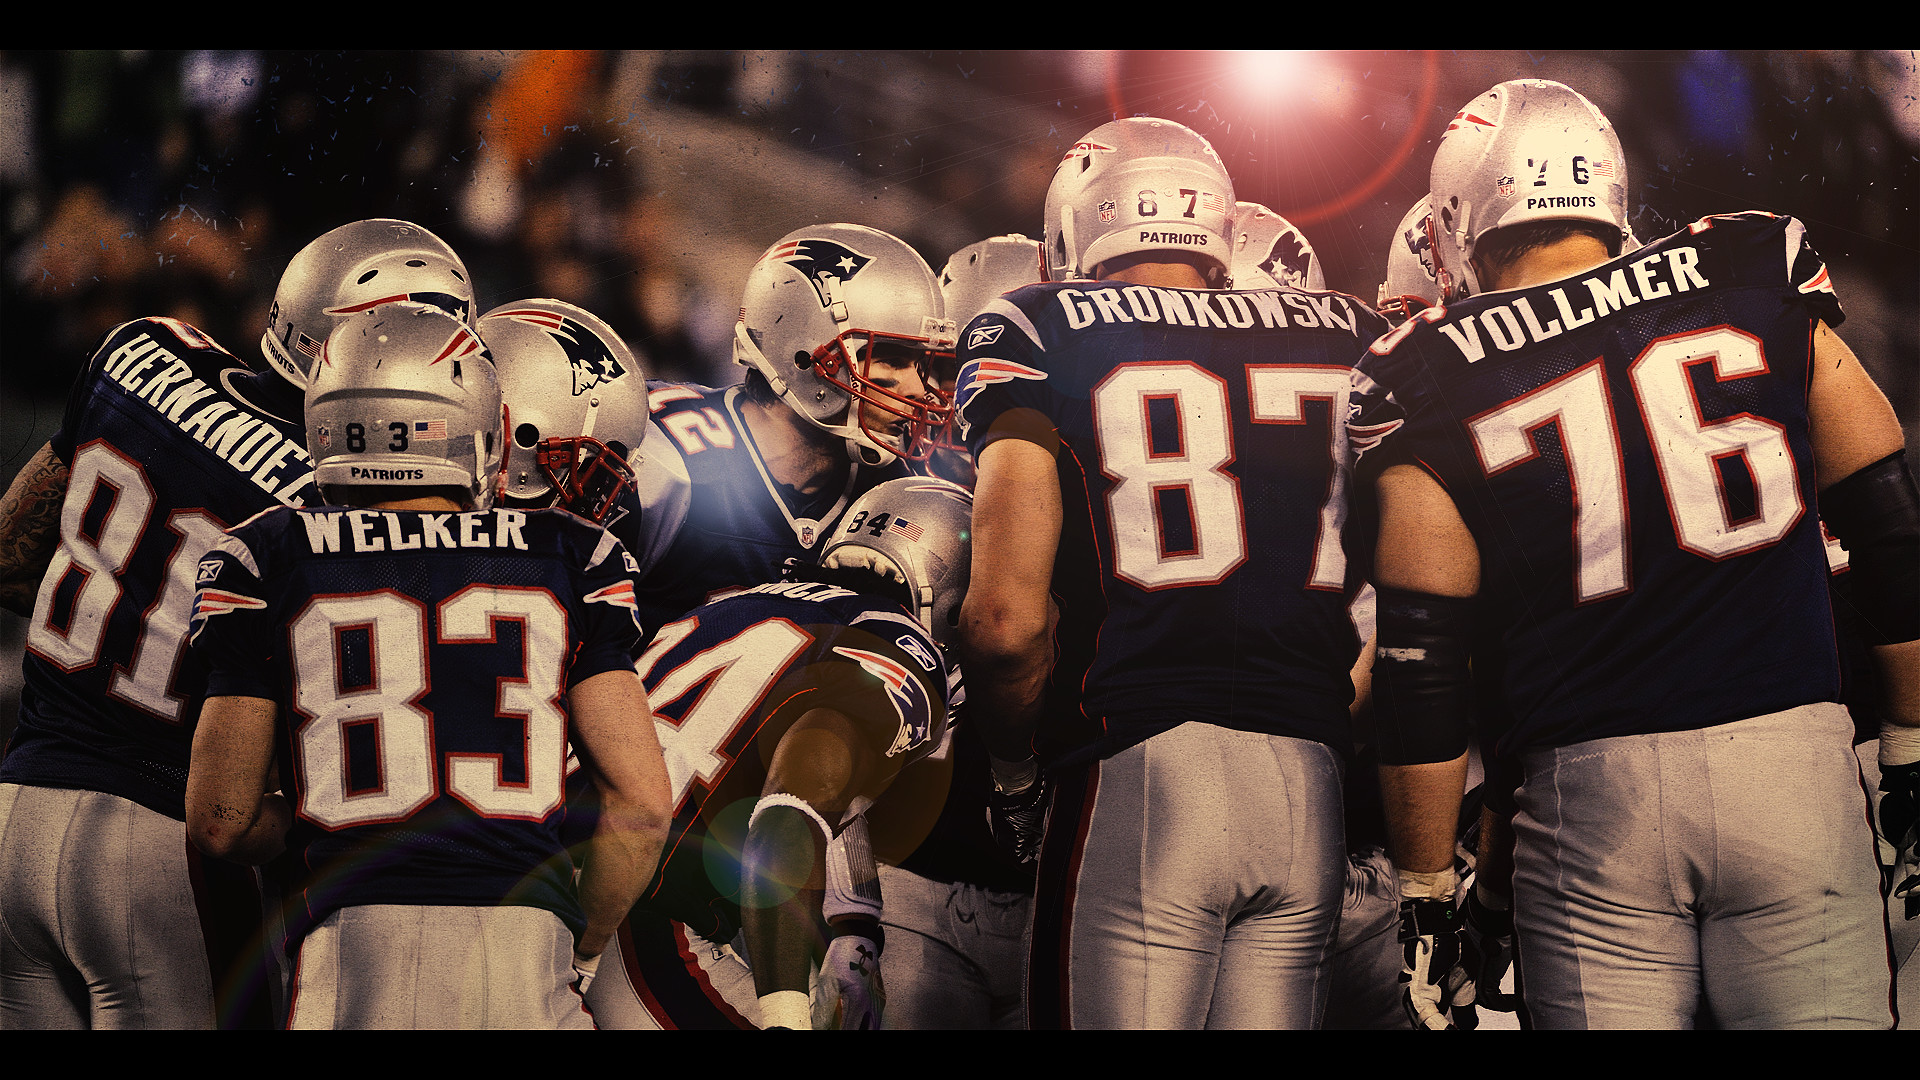 New England Patriots Wallpaper Large by HottSauce13 New England Patriots  Wallpaper Large by HottSauce13